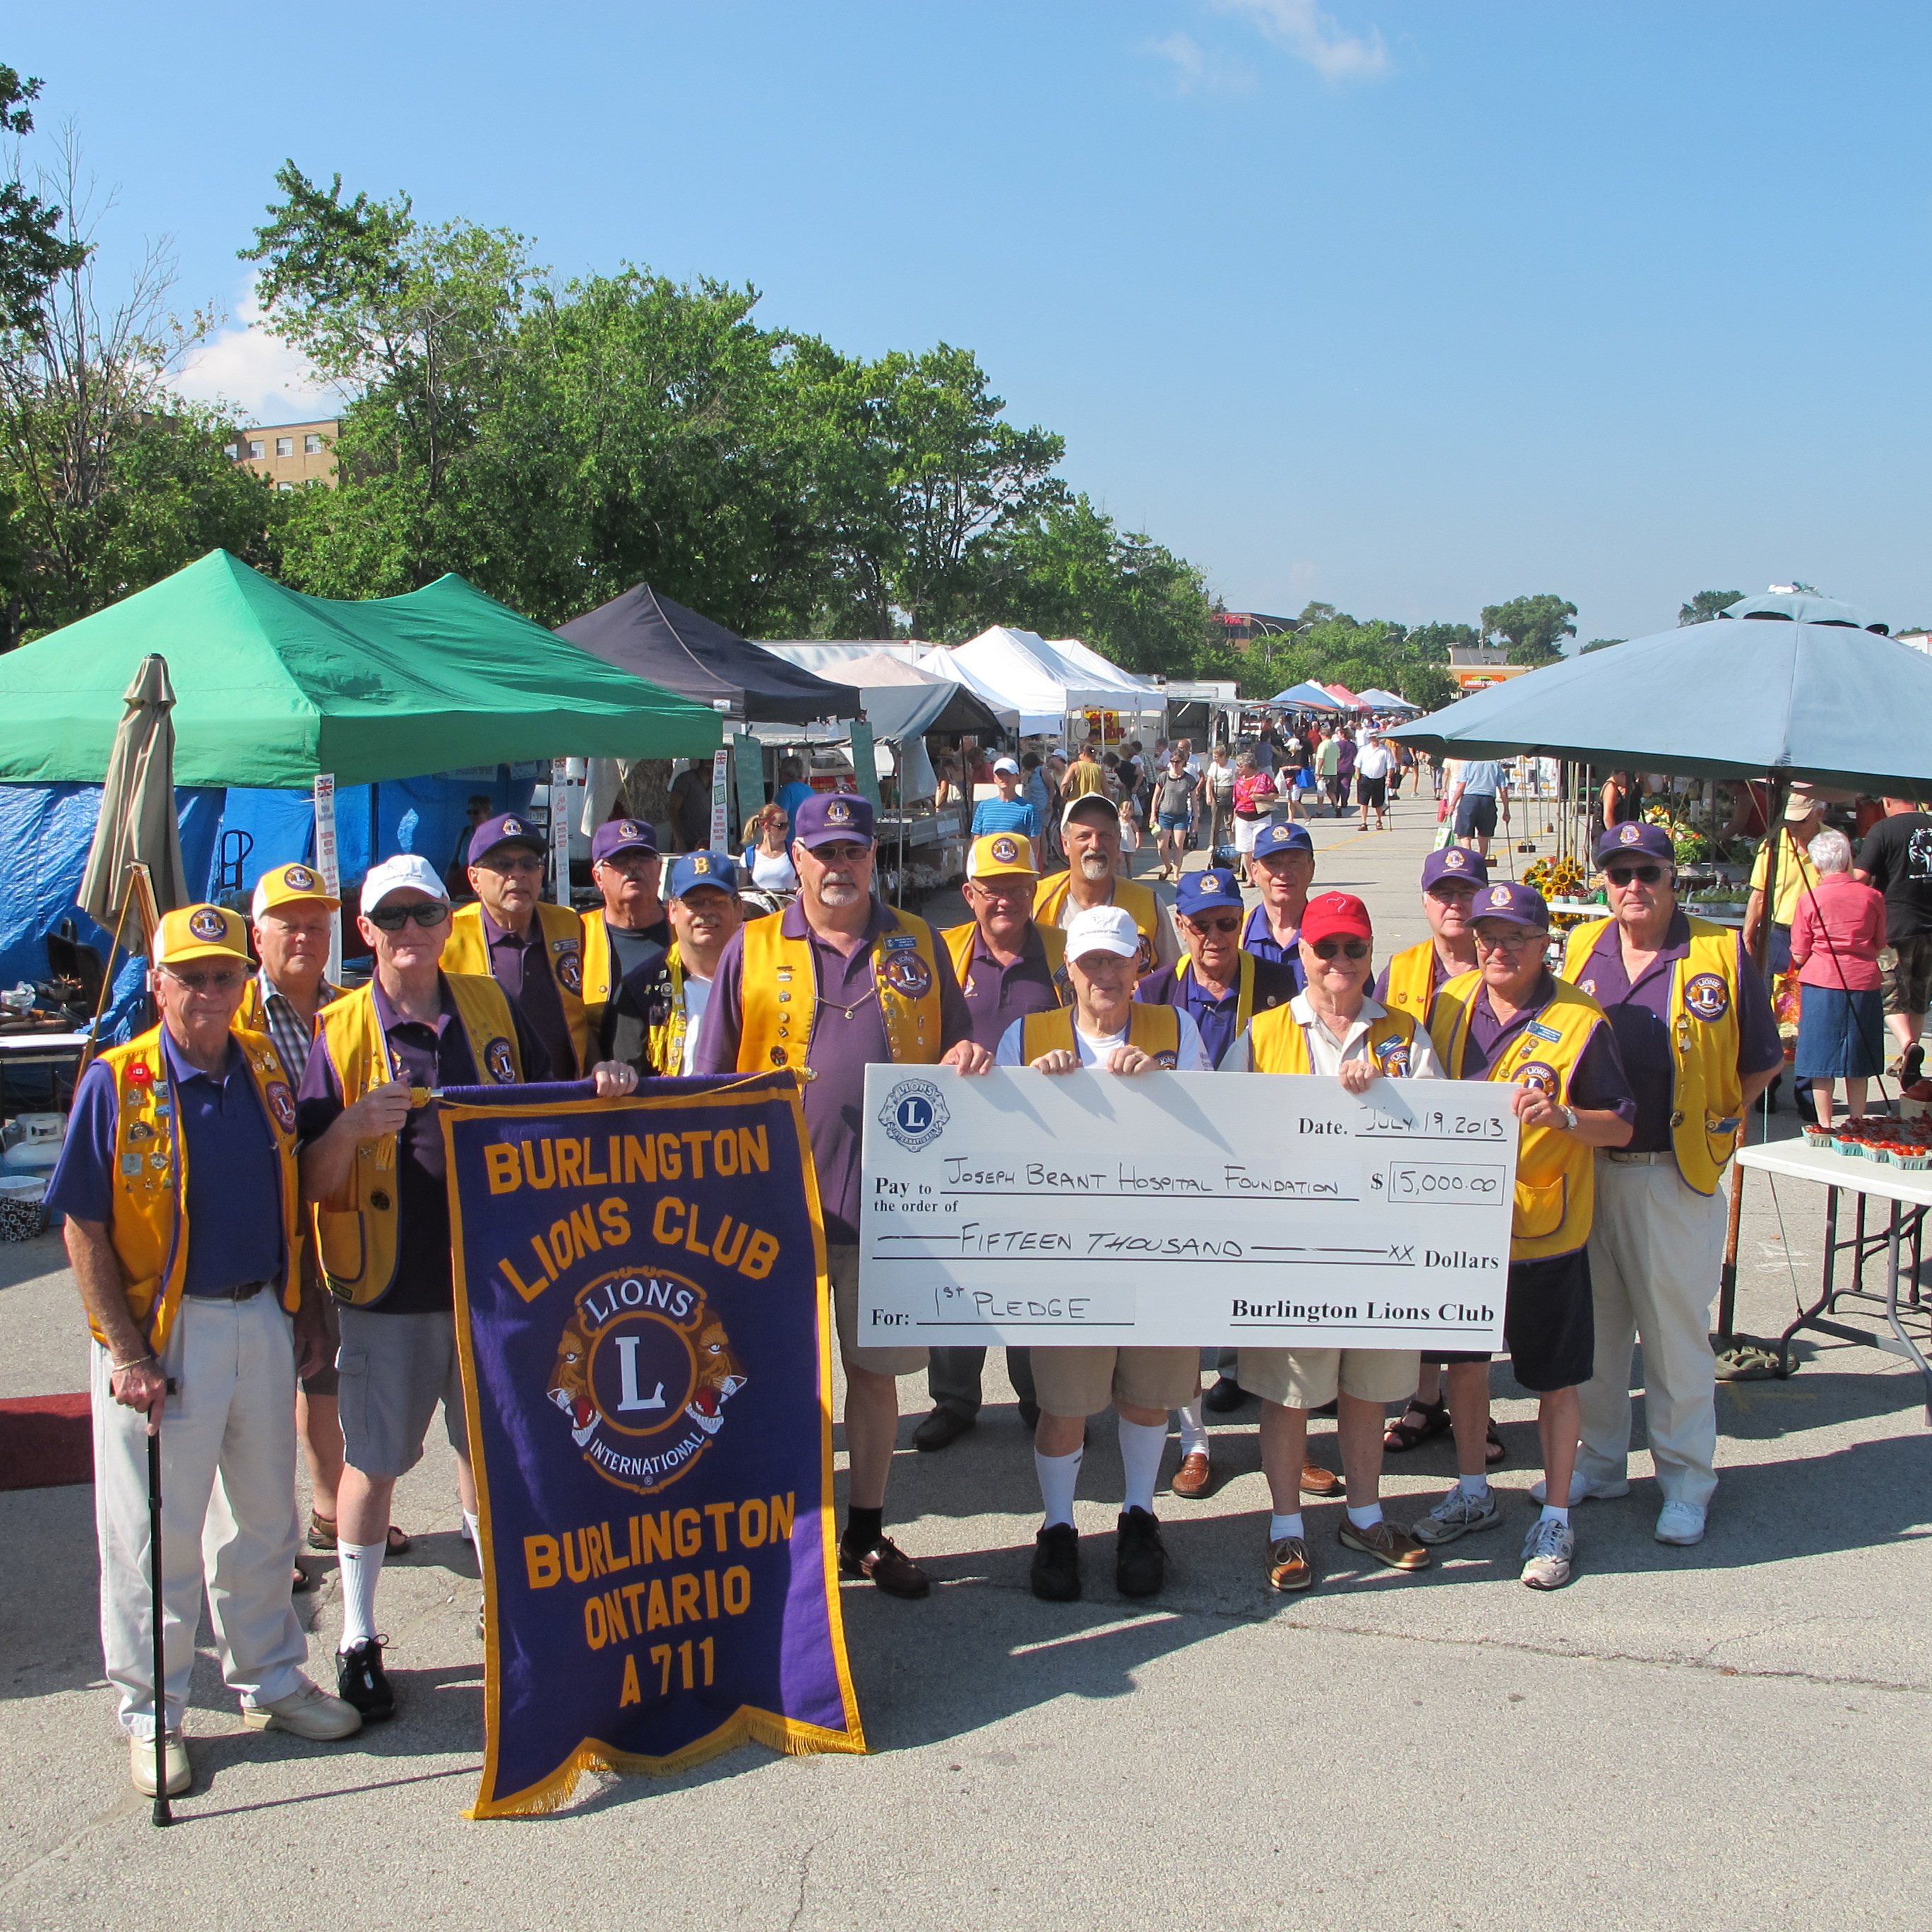 Burlington Lions showing their support for the redevelopment and expansion of the Joseph Brant Hospital - %750,000 over five years